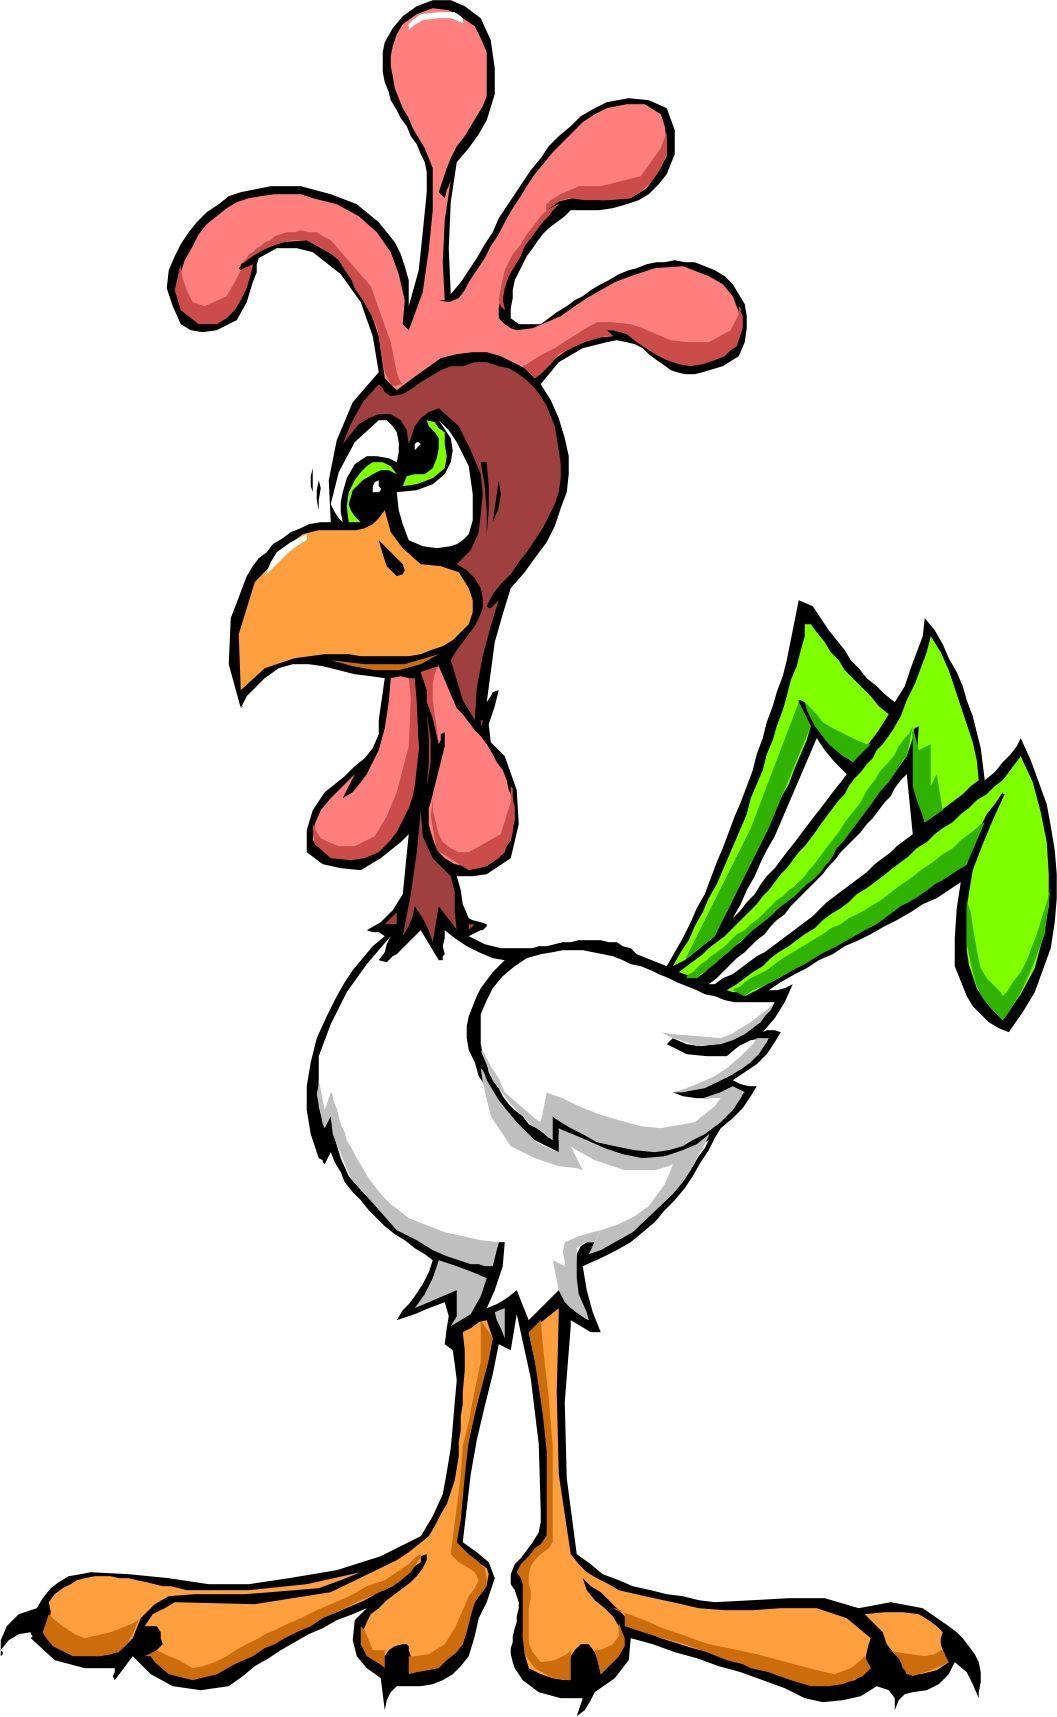 Cartoon Chickens. background, clipart, image etc